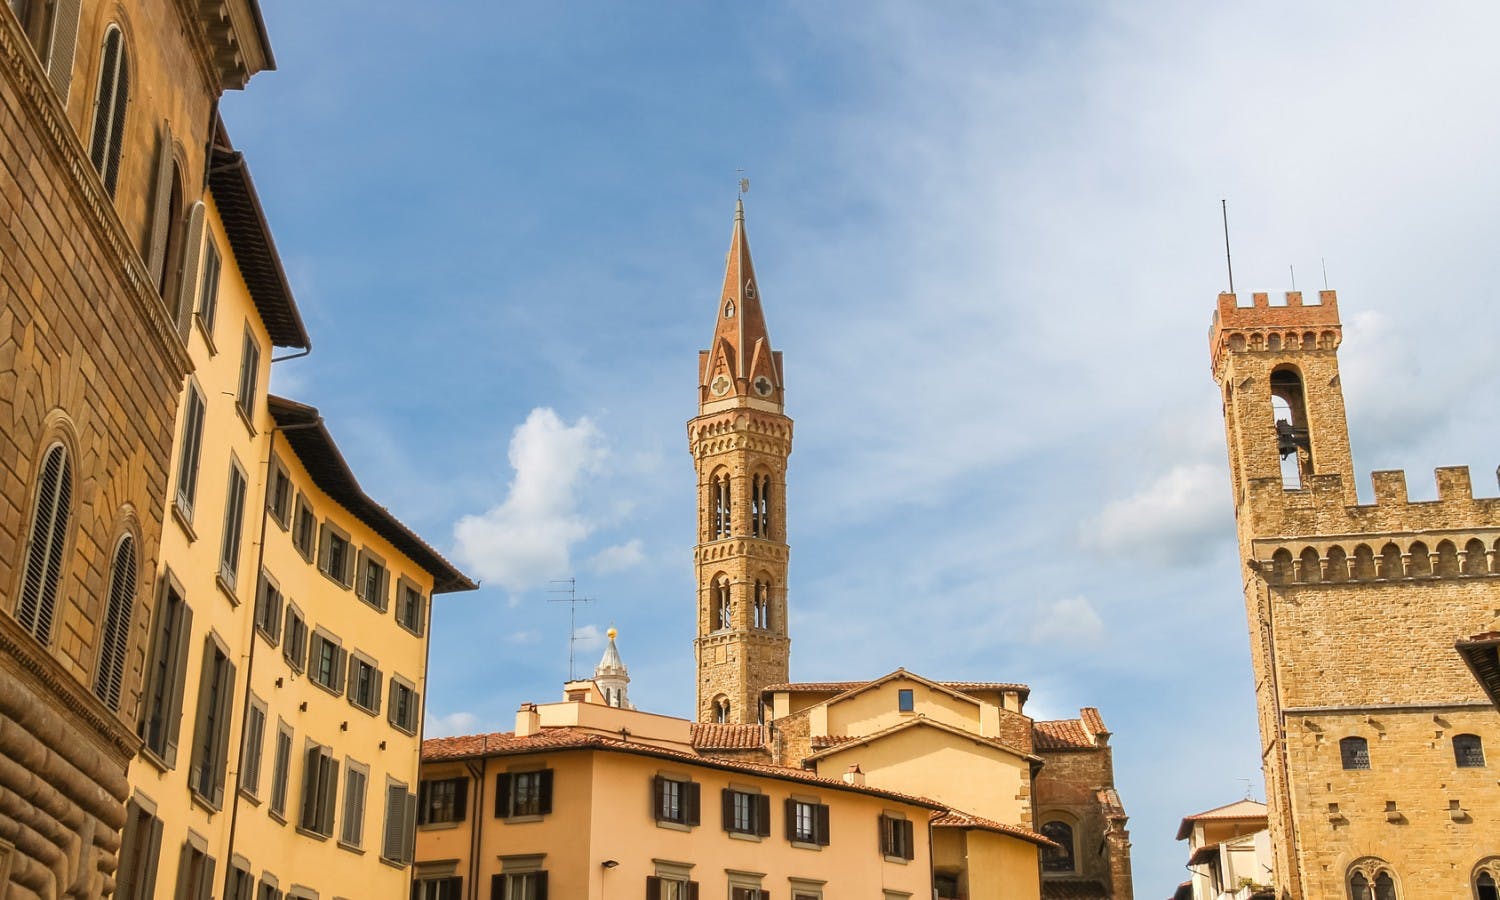 Treasures of Florence: guided walking tour with skip-the-line access to the Accademia and Uffizi galleries